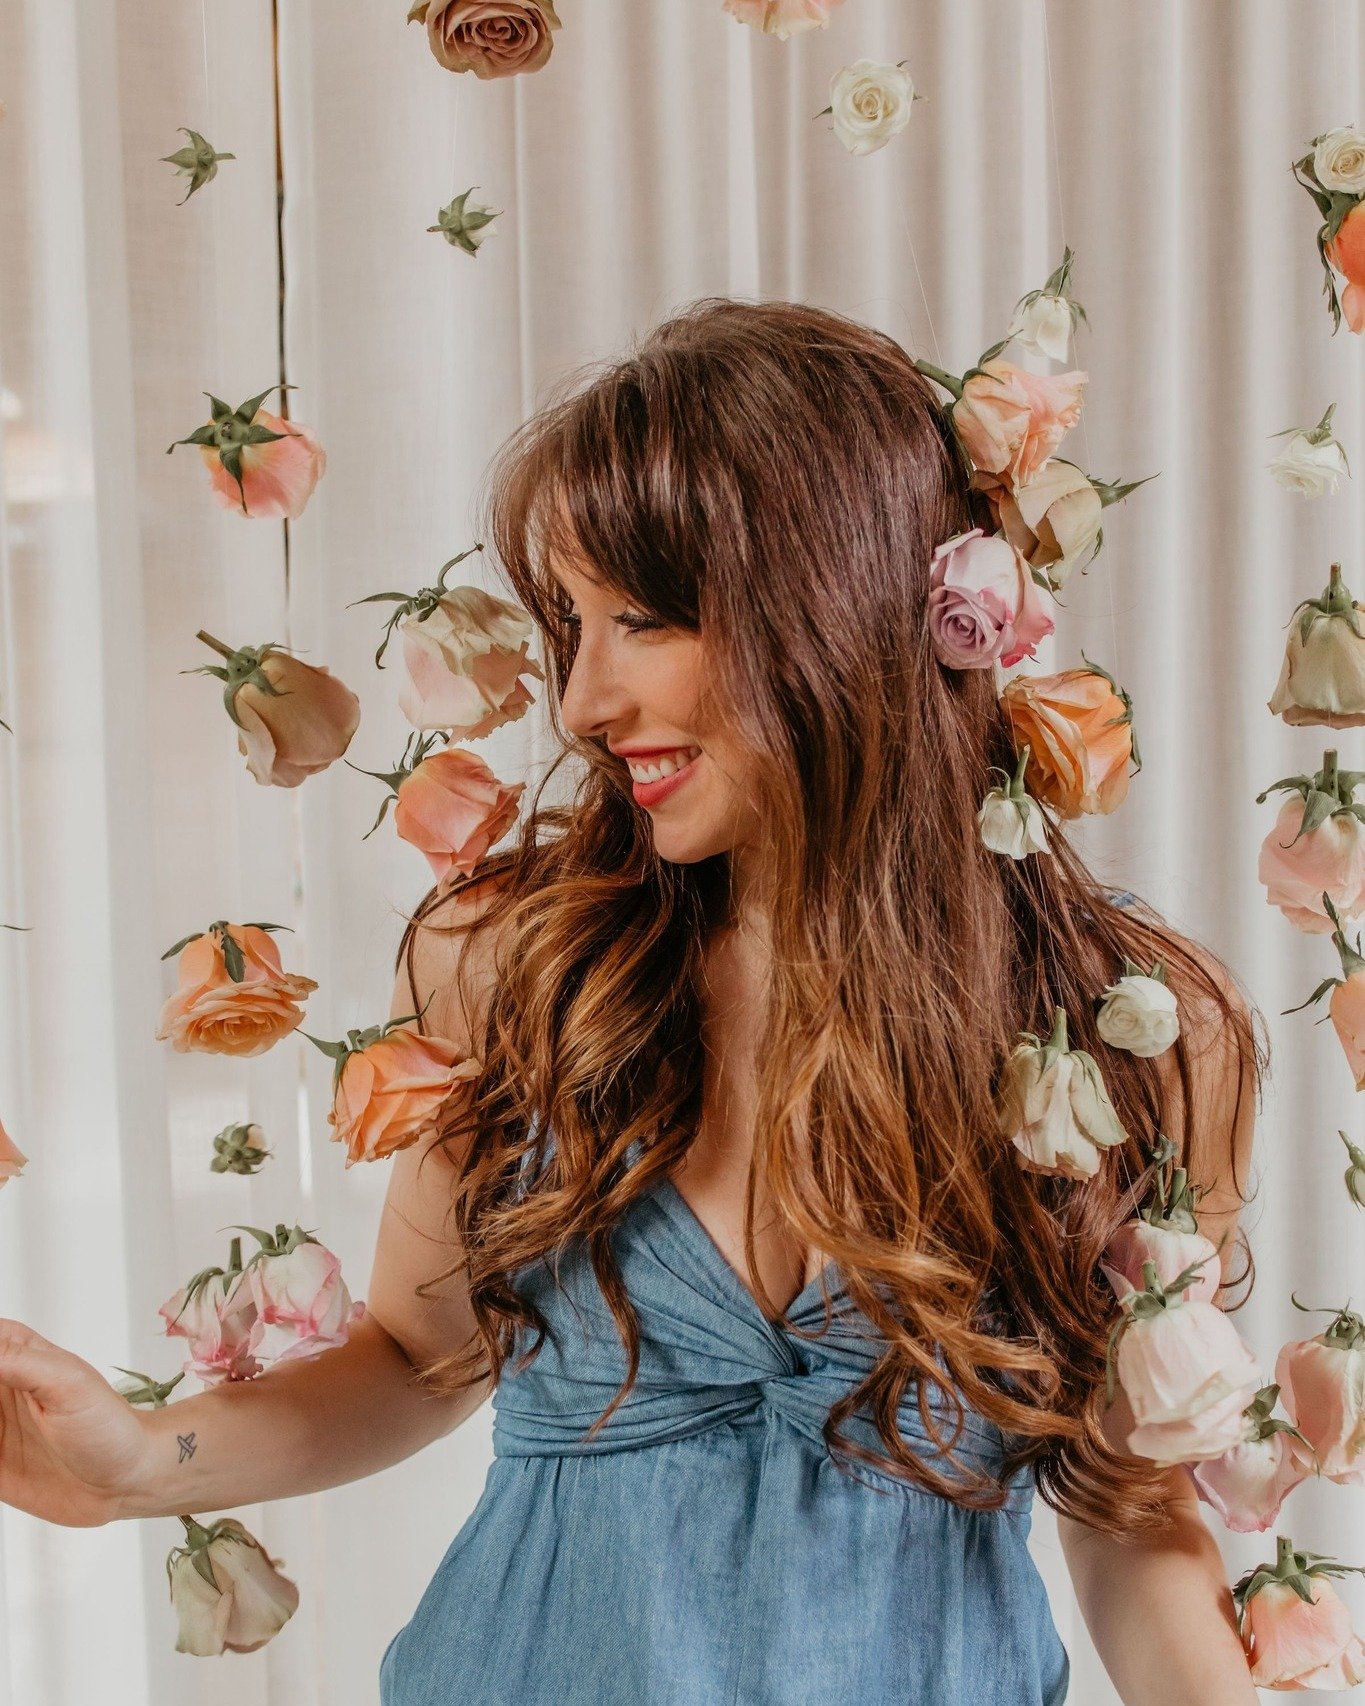 Happy Fri-Yay! 🌸 Spring wedding season is in full bloom! Are you ready for all the love and magic this season brings? Stay tuned for some stunning wedding inspiration coming your way! 💍✨ 

#HeirloomEventCompany #DreamWedding #HeirloomEvents #EventT